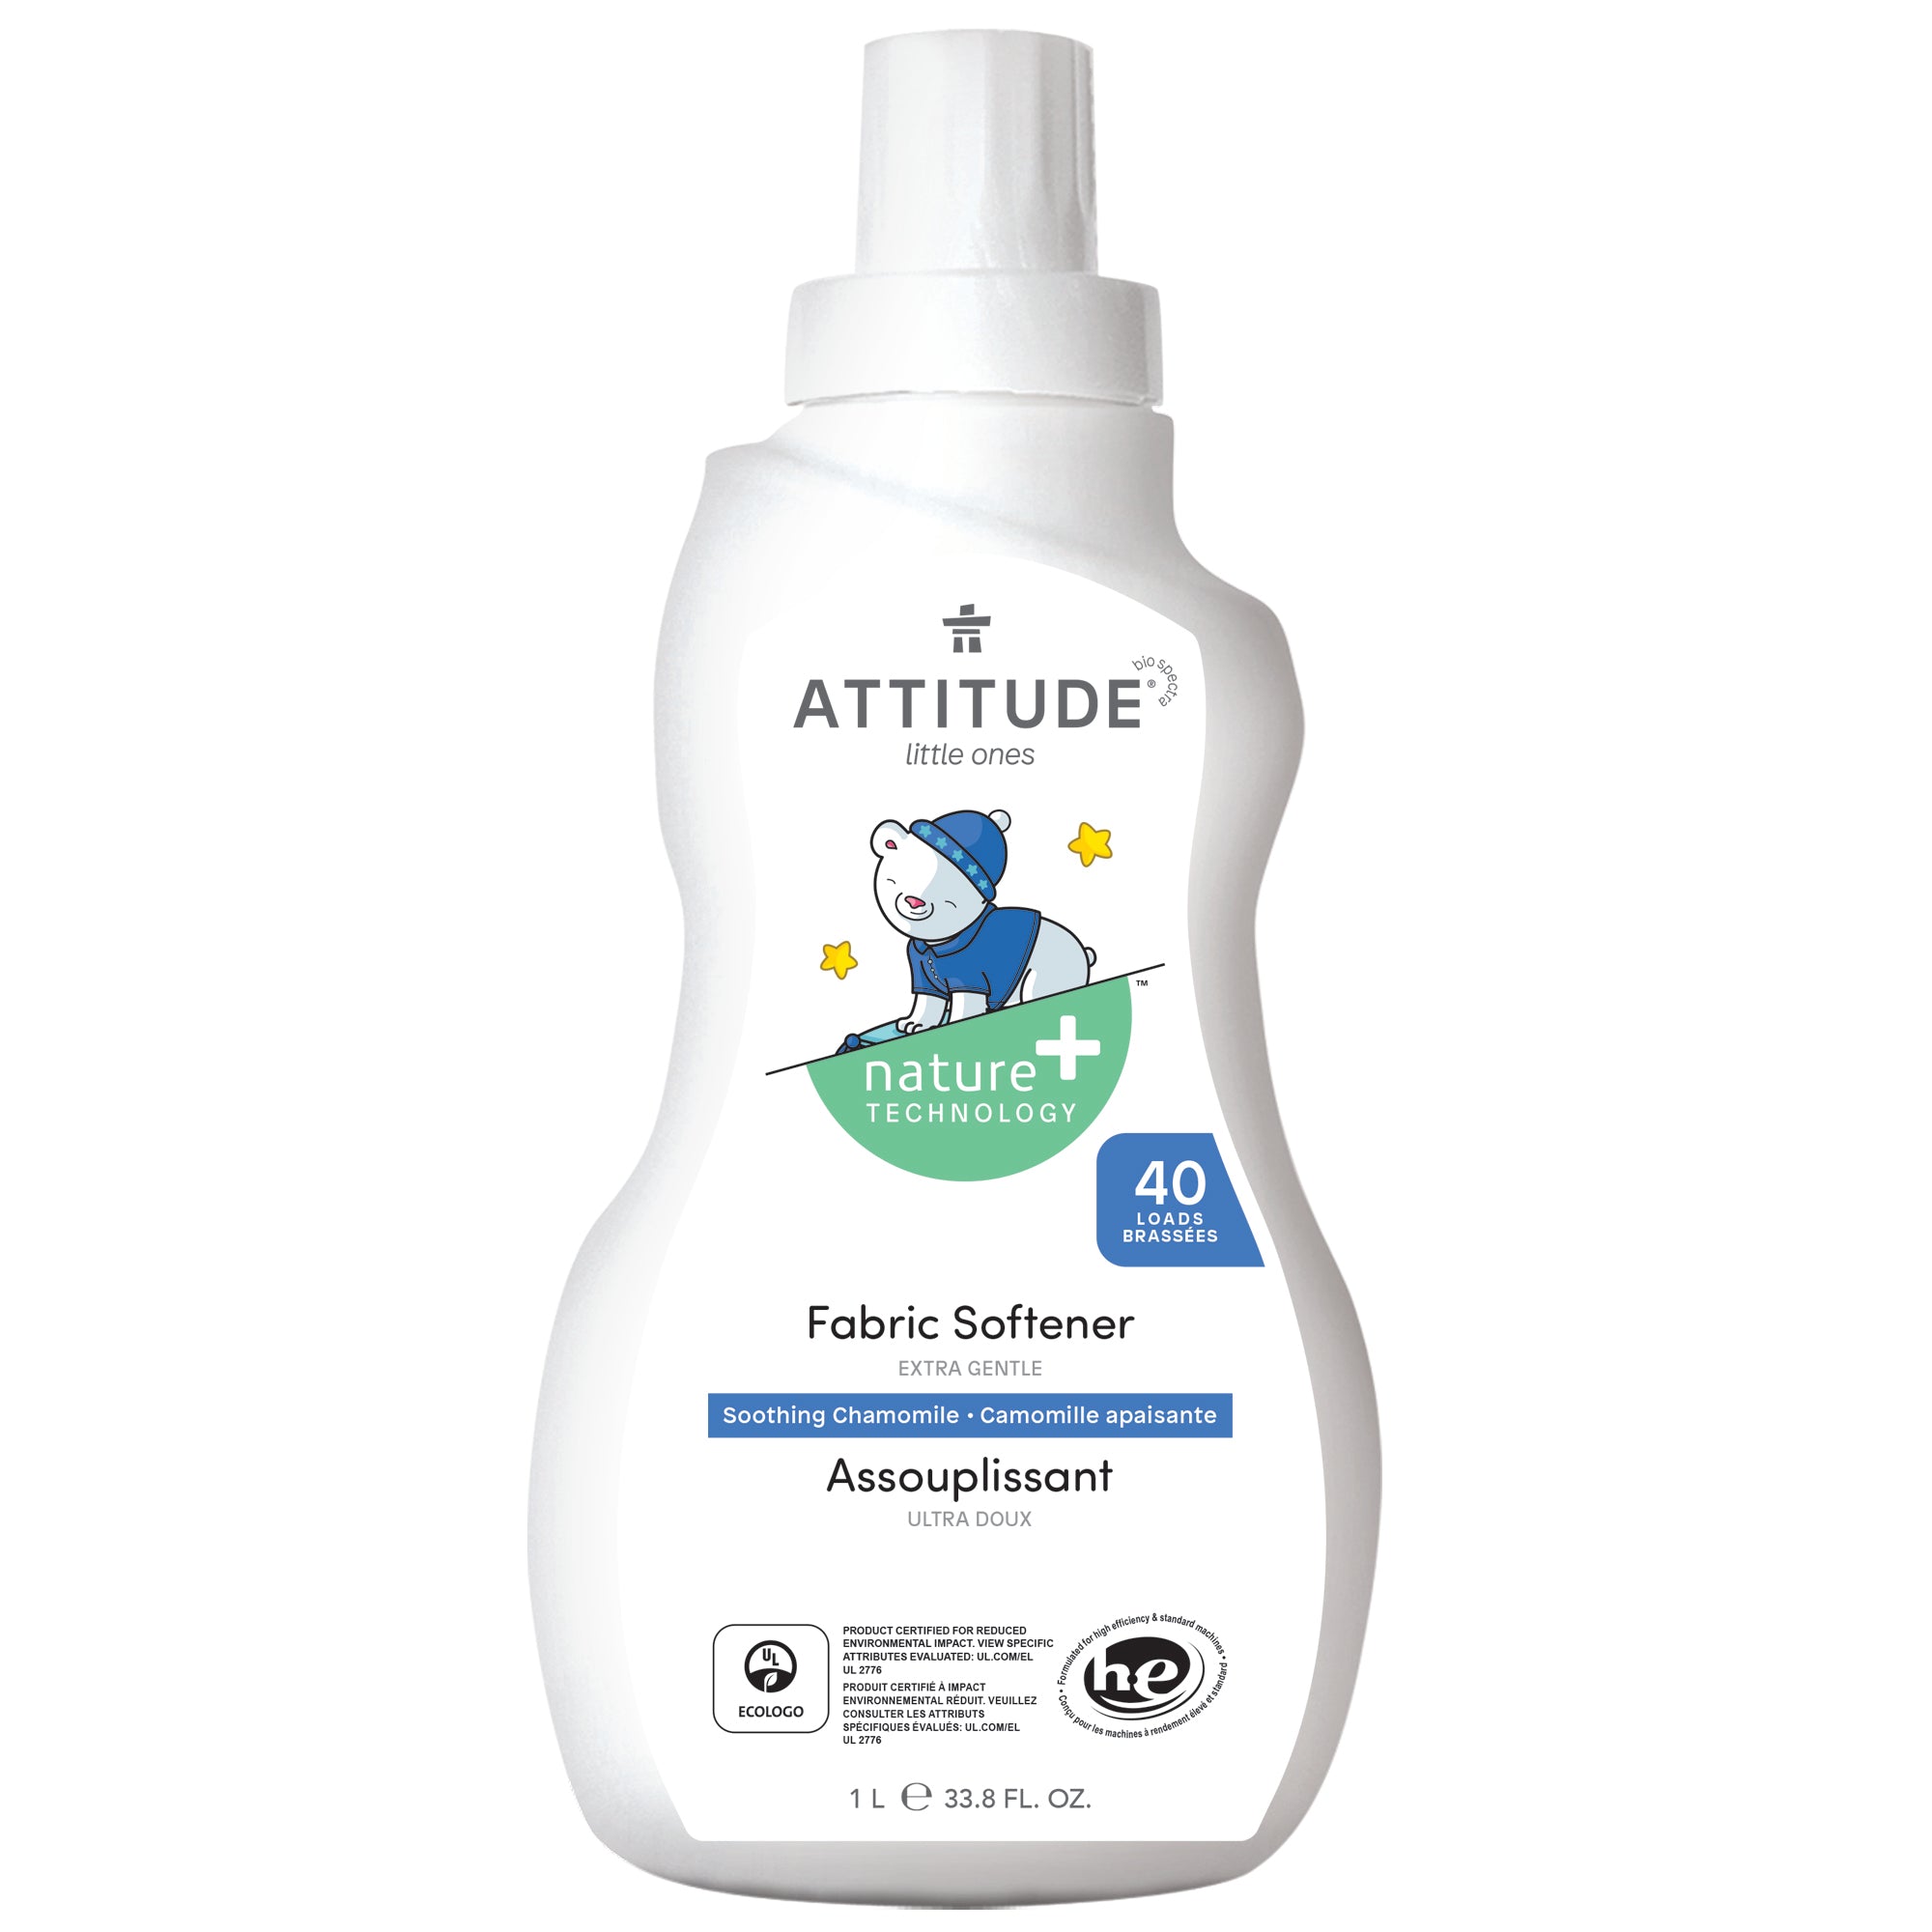 Attitude - Little Ones Fabric Softener - Soothing Chamomille - Night - 40 Loads 1L